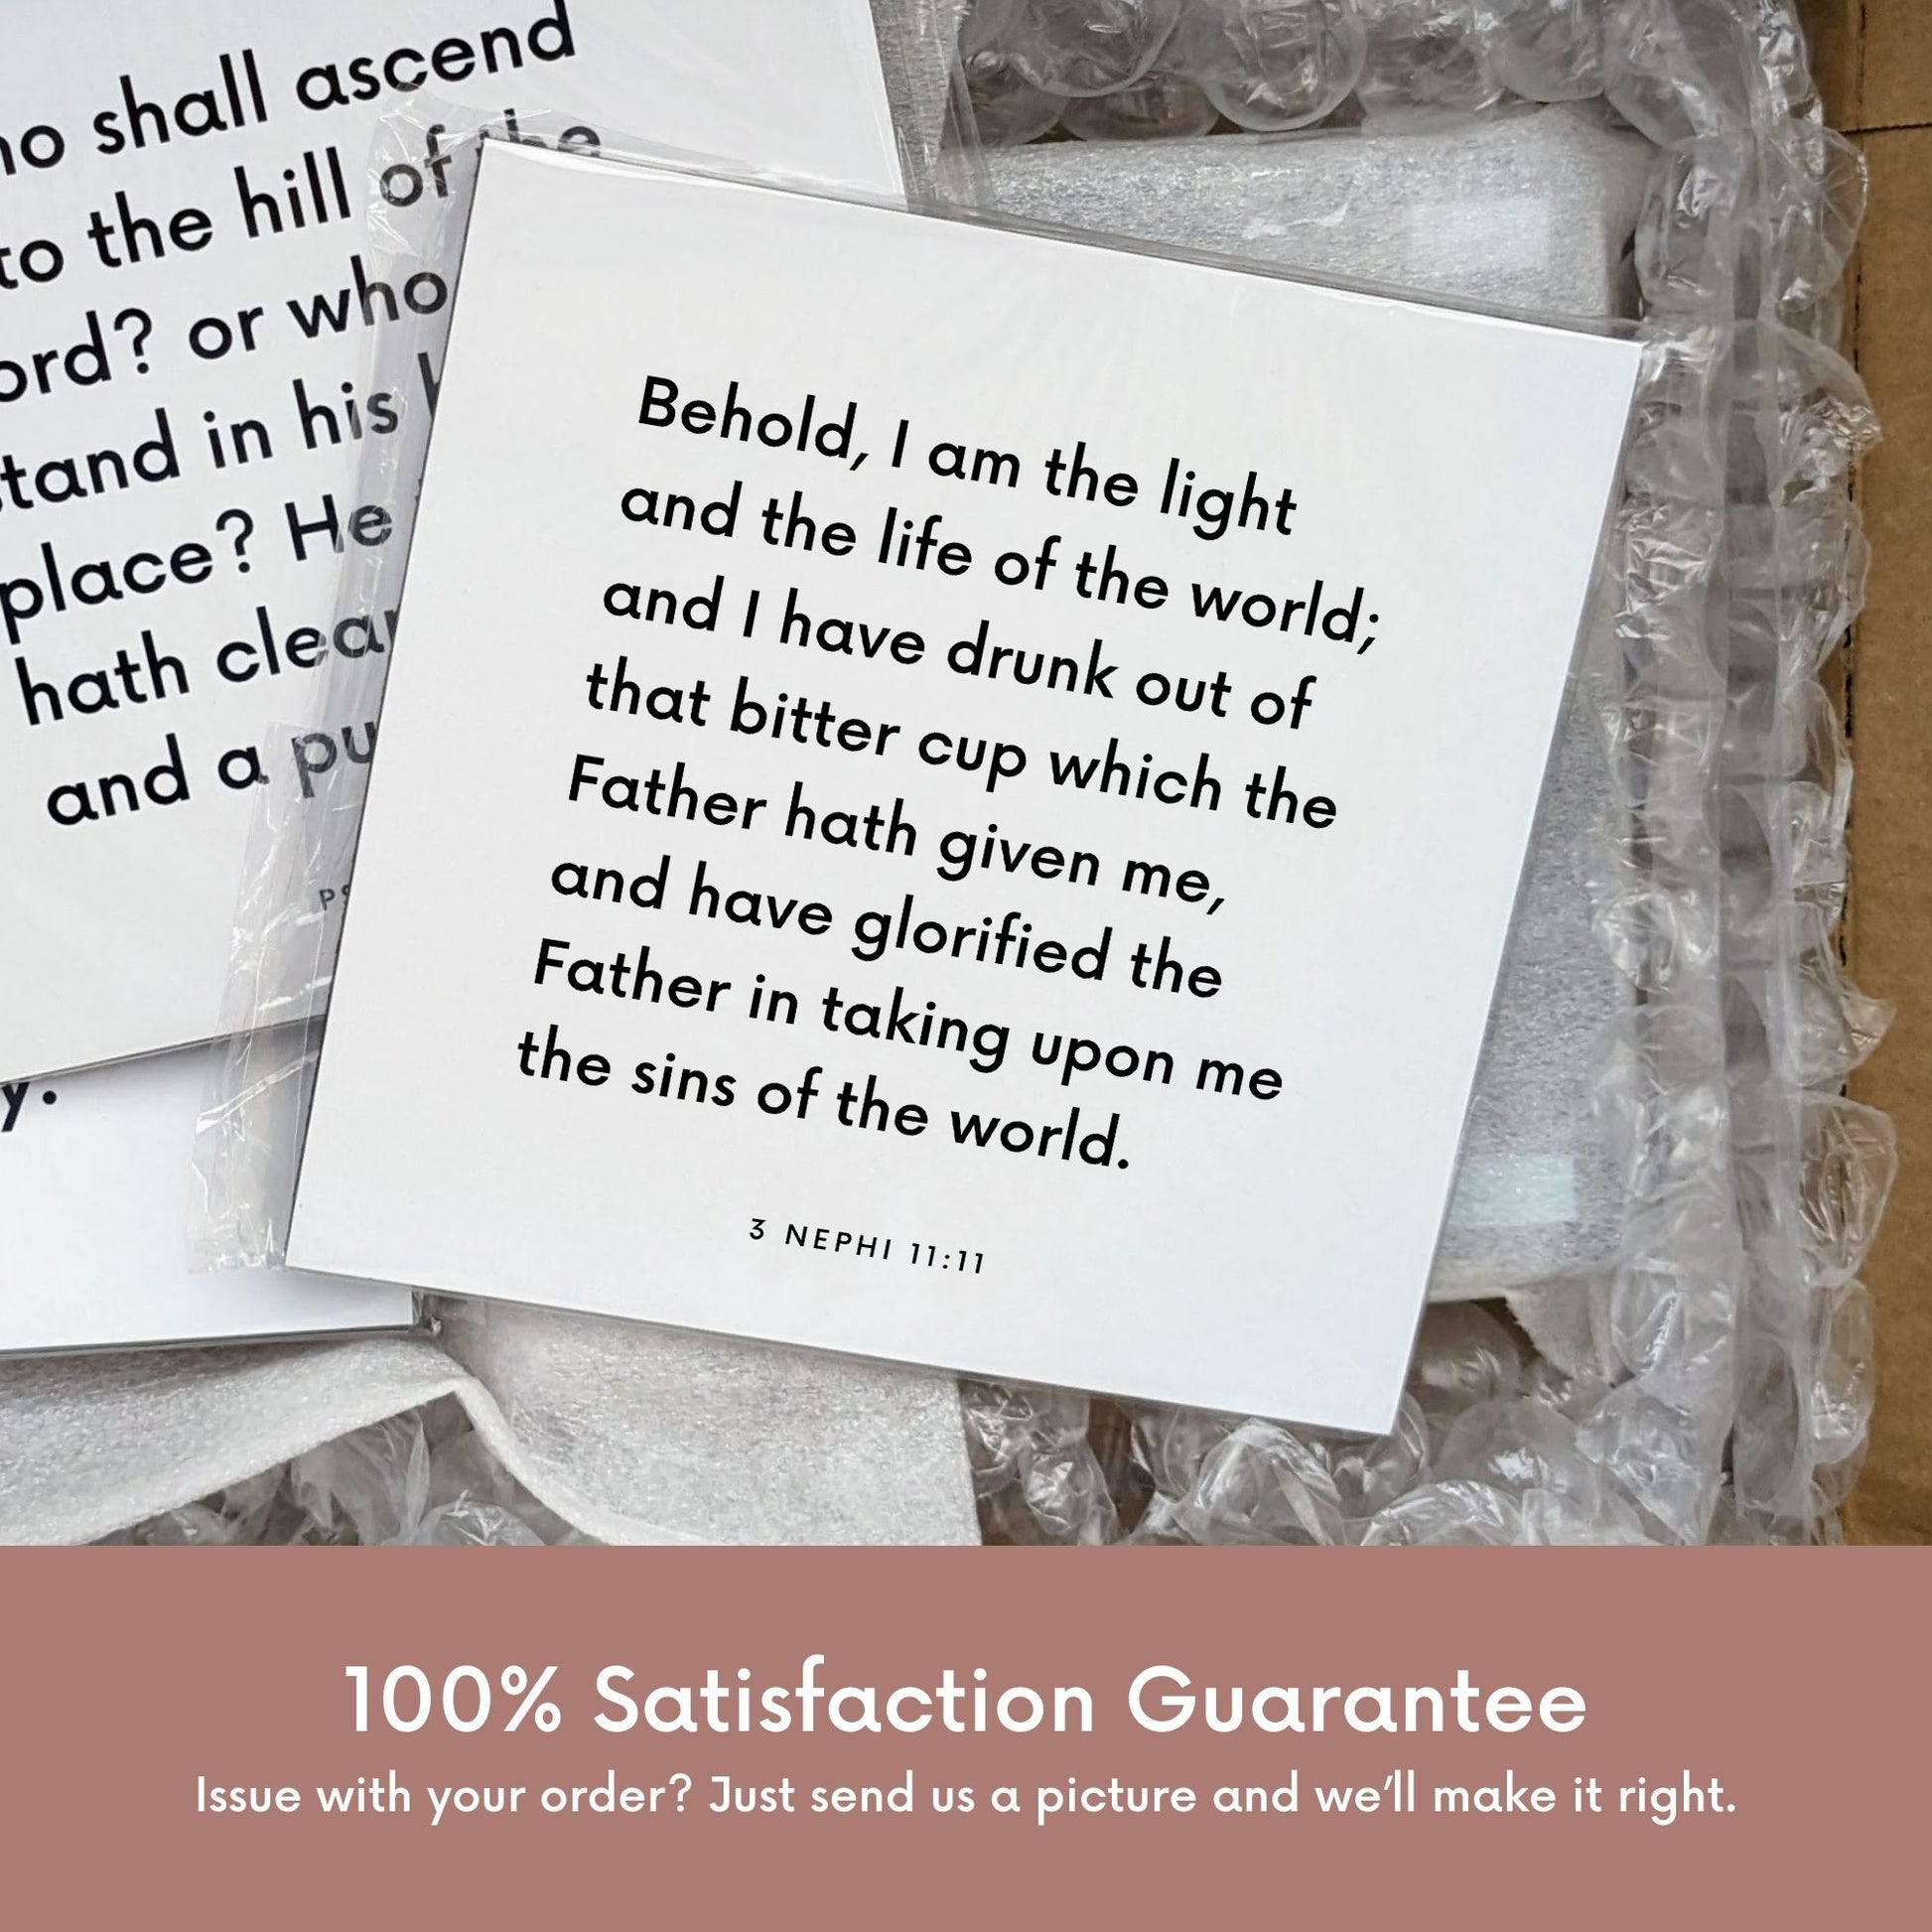 Shipping materials for scripture tile of 3 Nephi 11:11 - "Behold, I am the light and the life of the world"